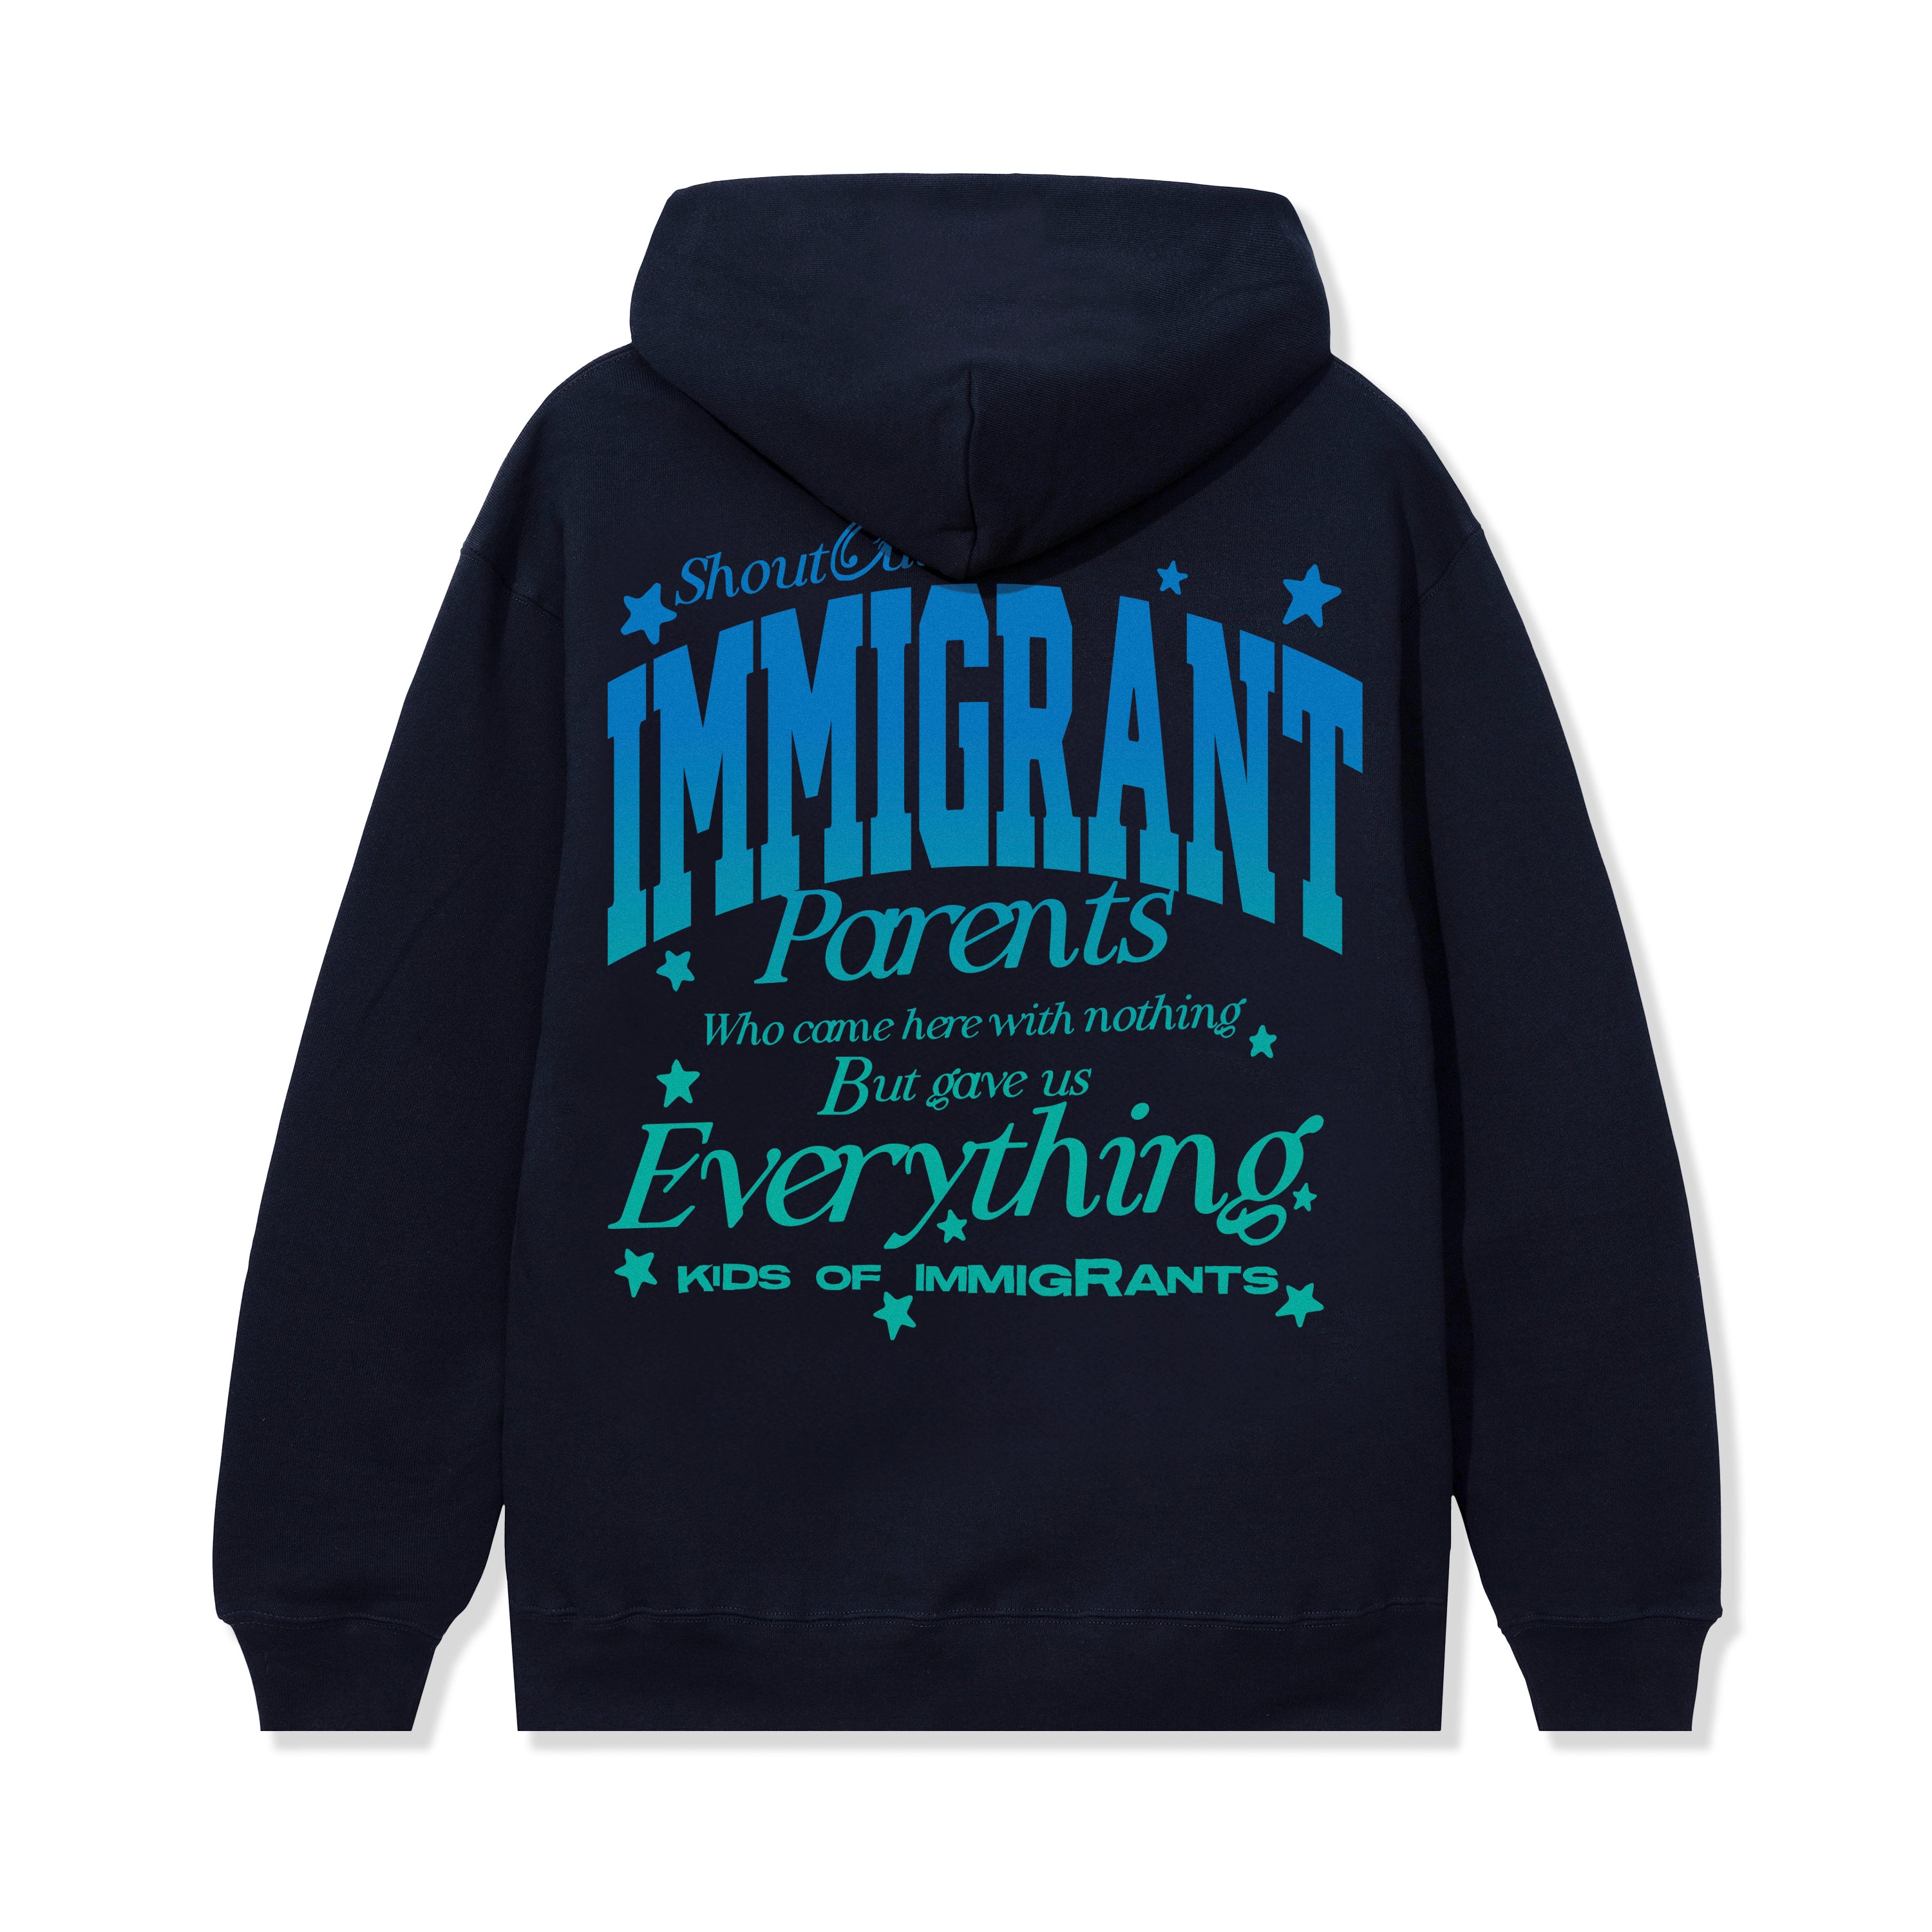 THIS IS FOR OUR FAMILY HOODIE